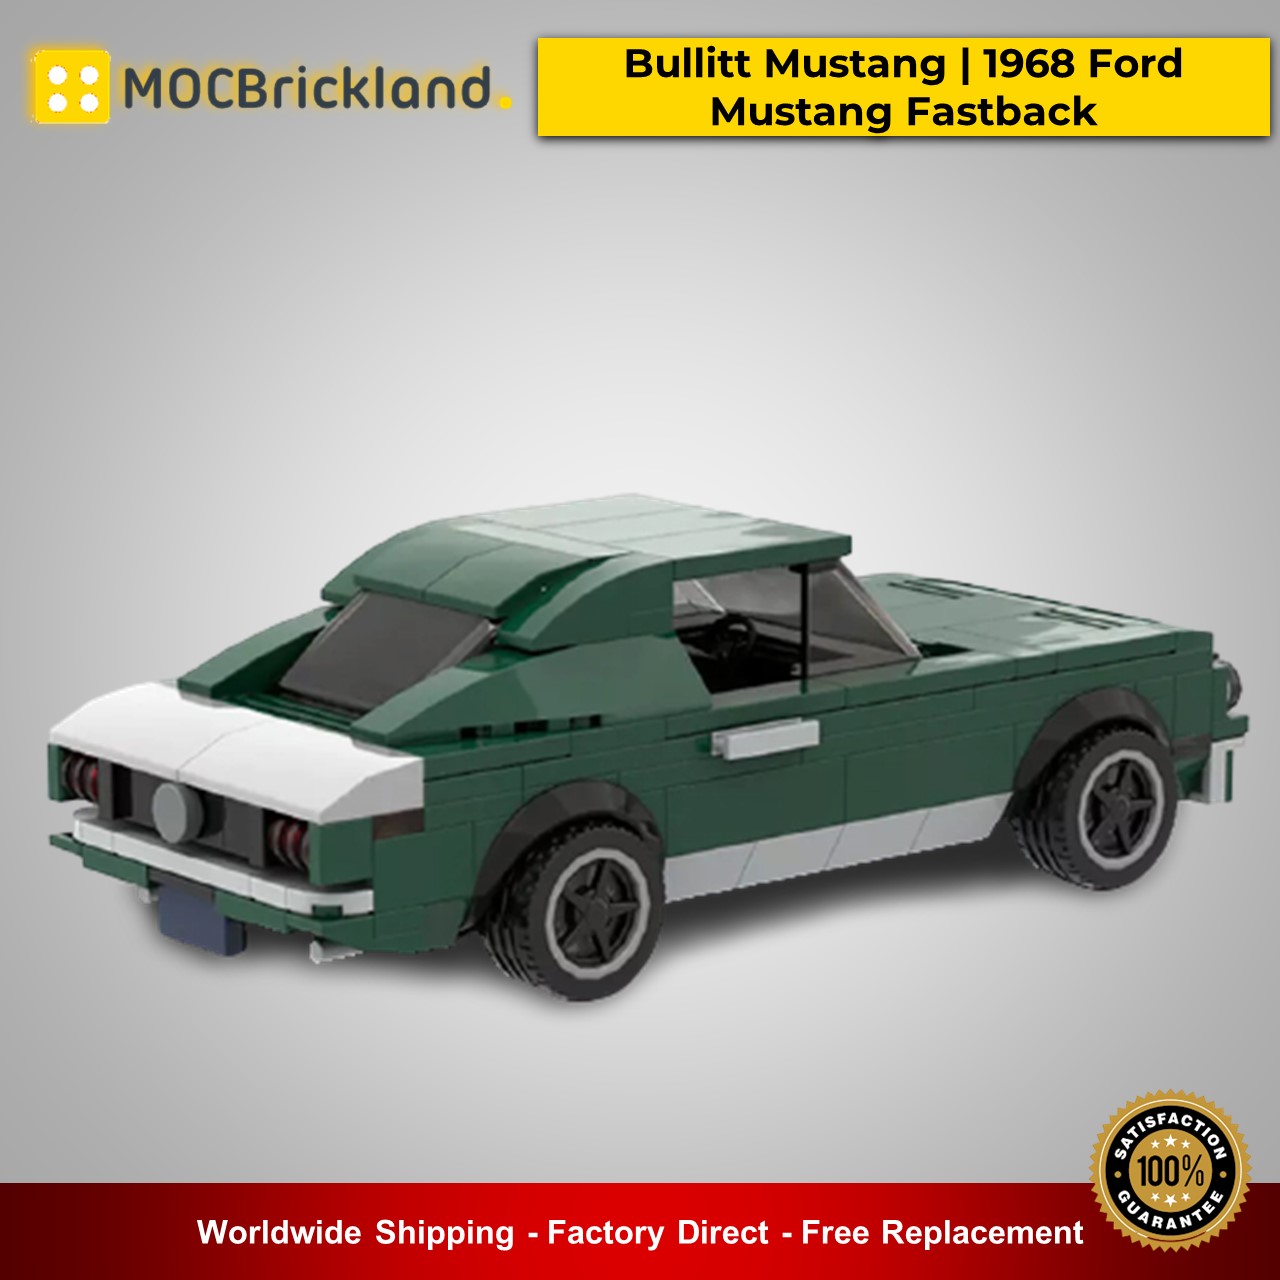 MOC-21388 Bullitt Mustang | 1968 Ford Mustang Fastback Technic Designed By mkibs With 253 Pieces